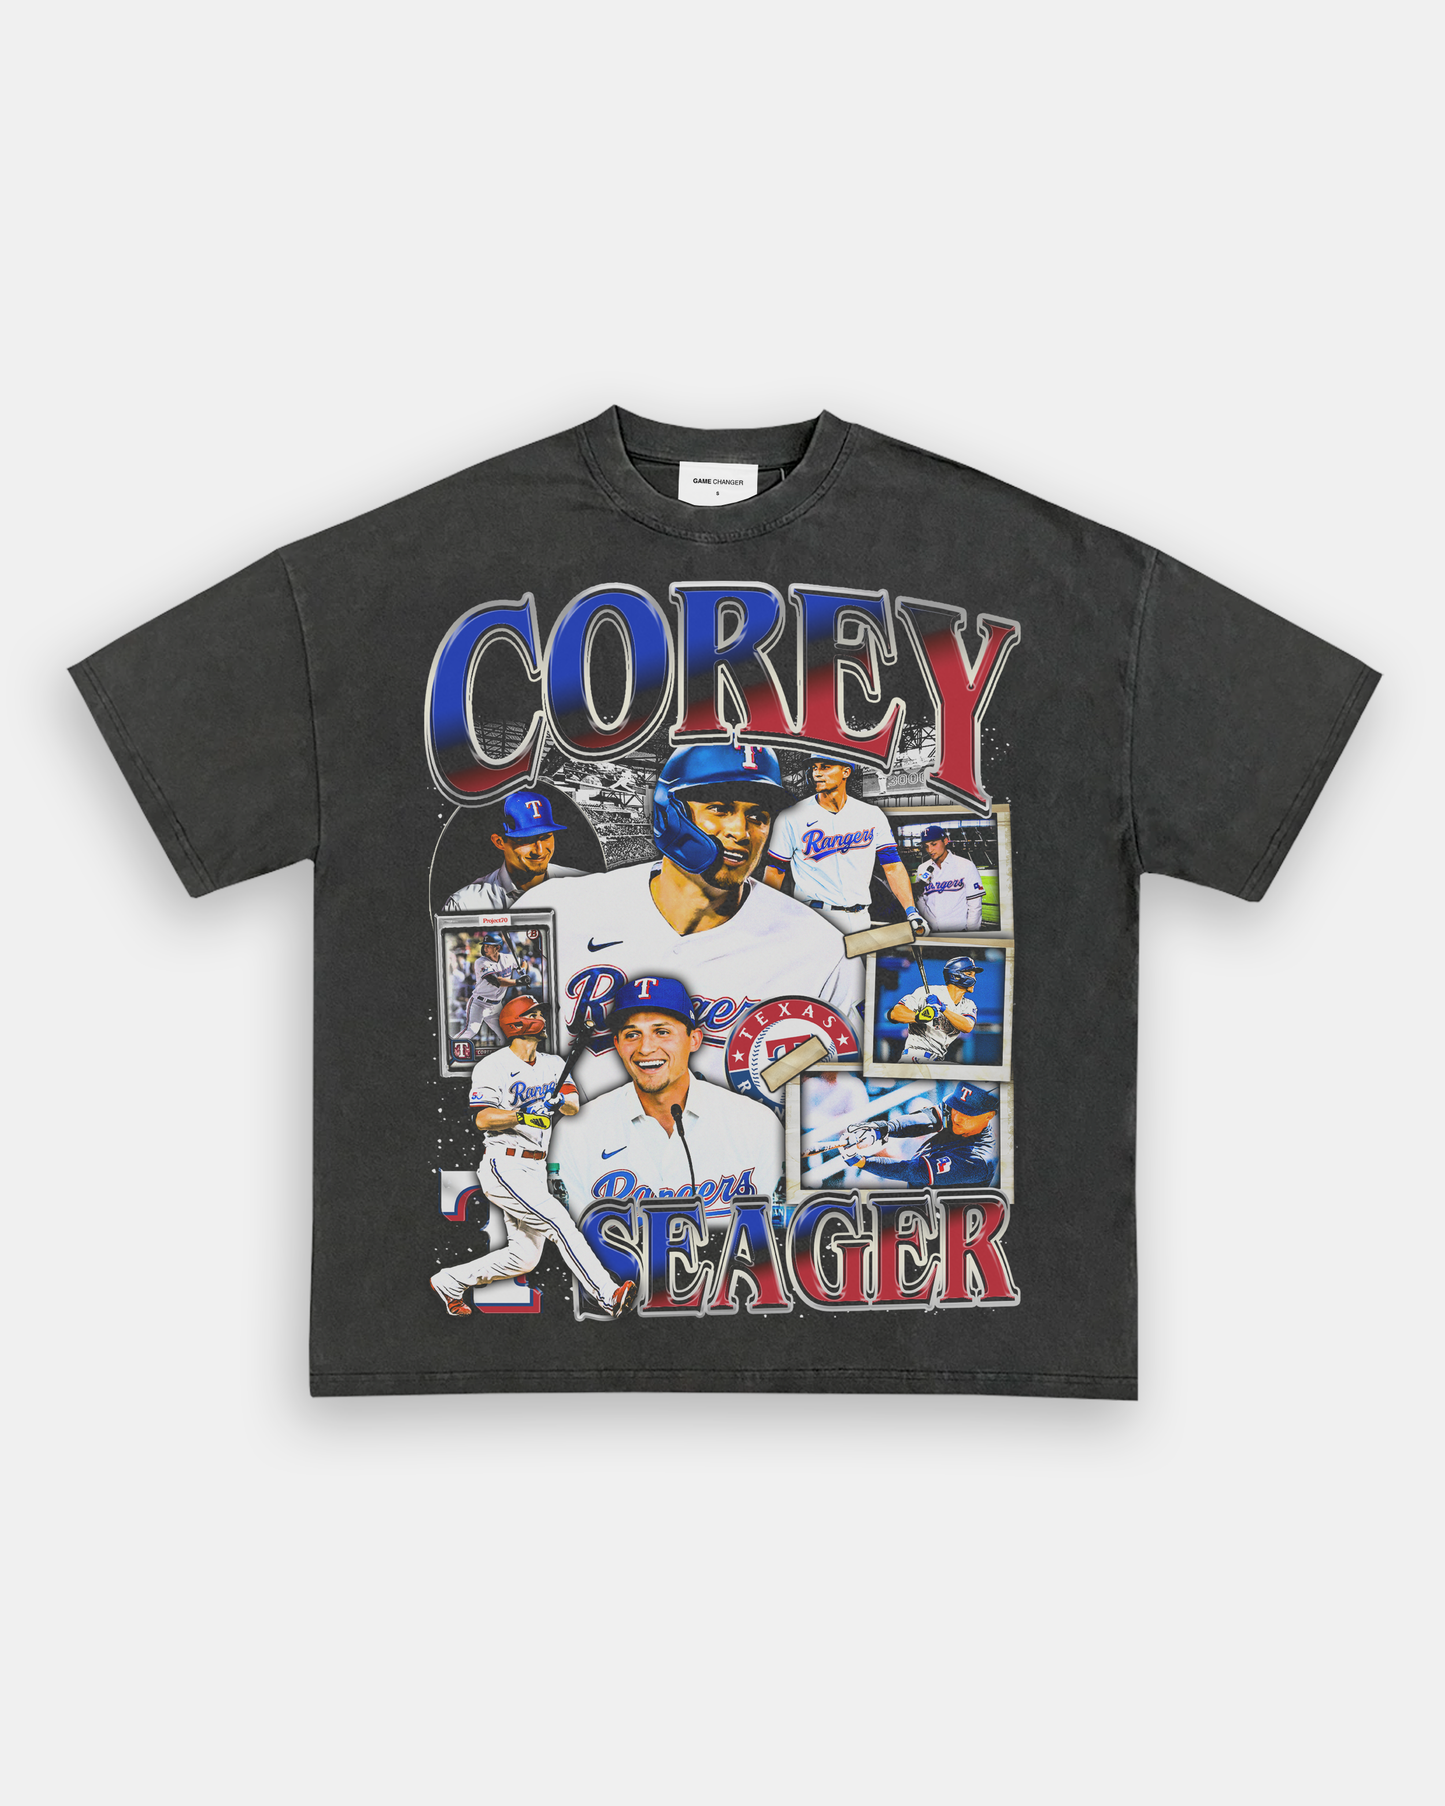 COREY SEAGER TEE